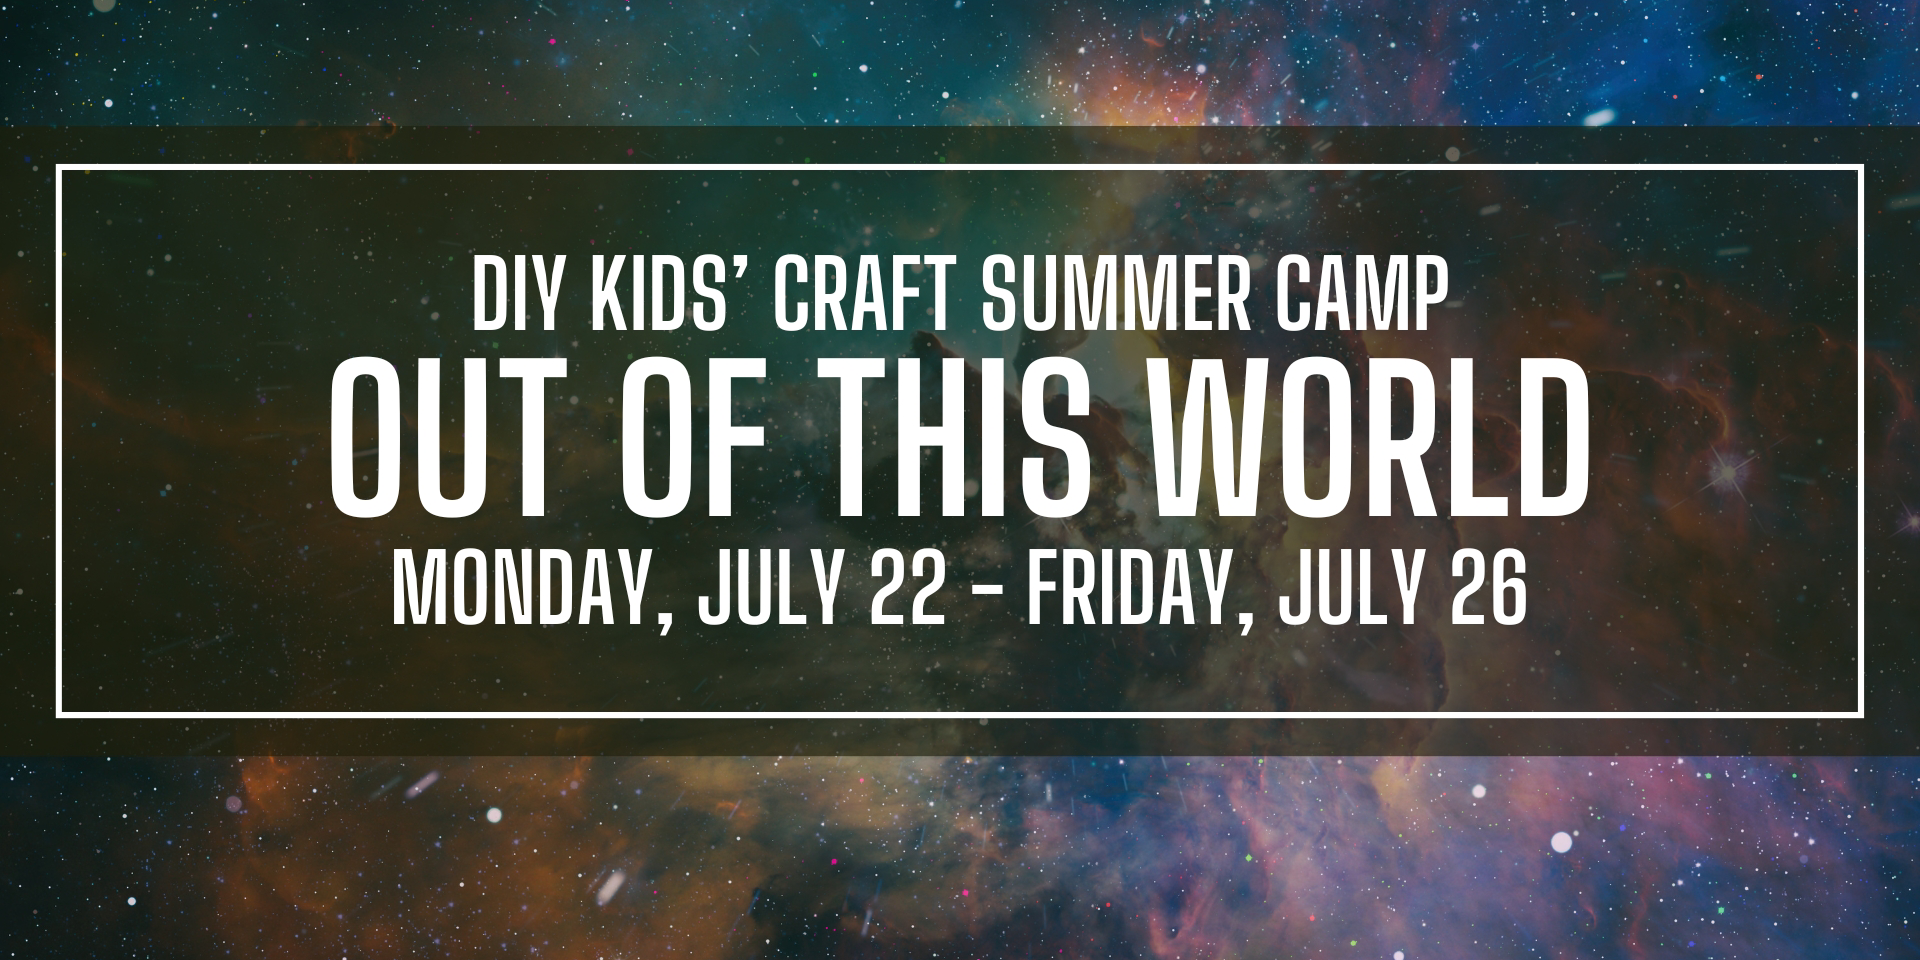 Out of this World DIY Kids' Craft Summer Camp